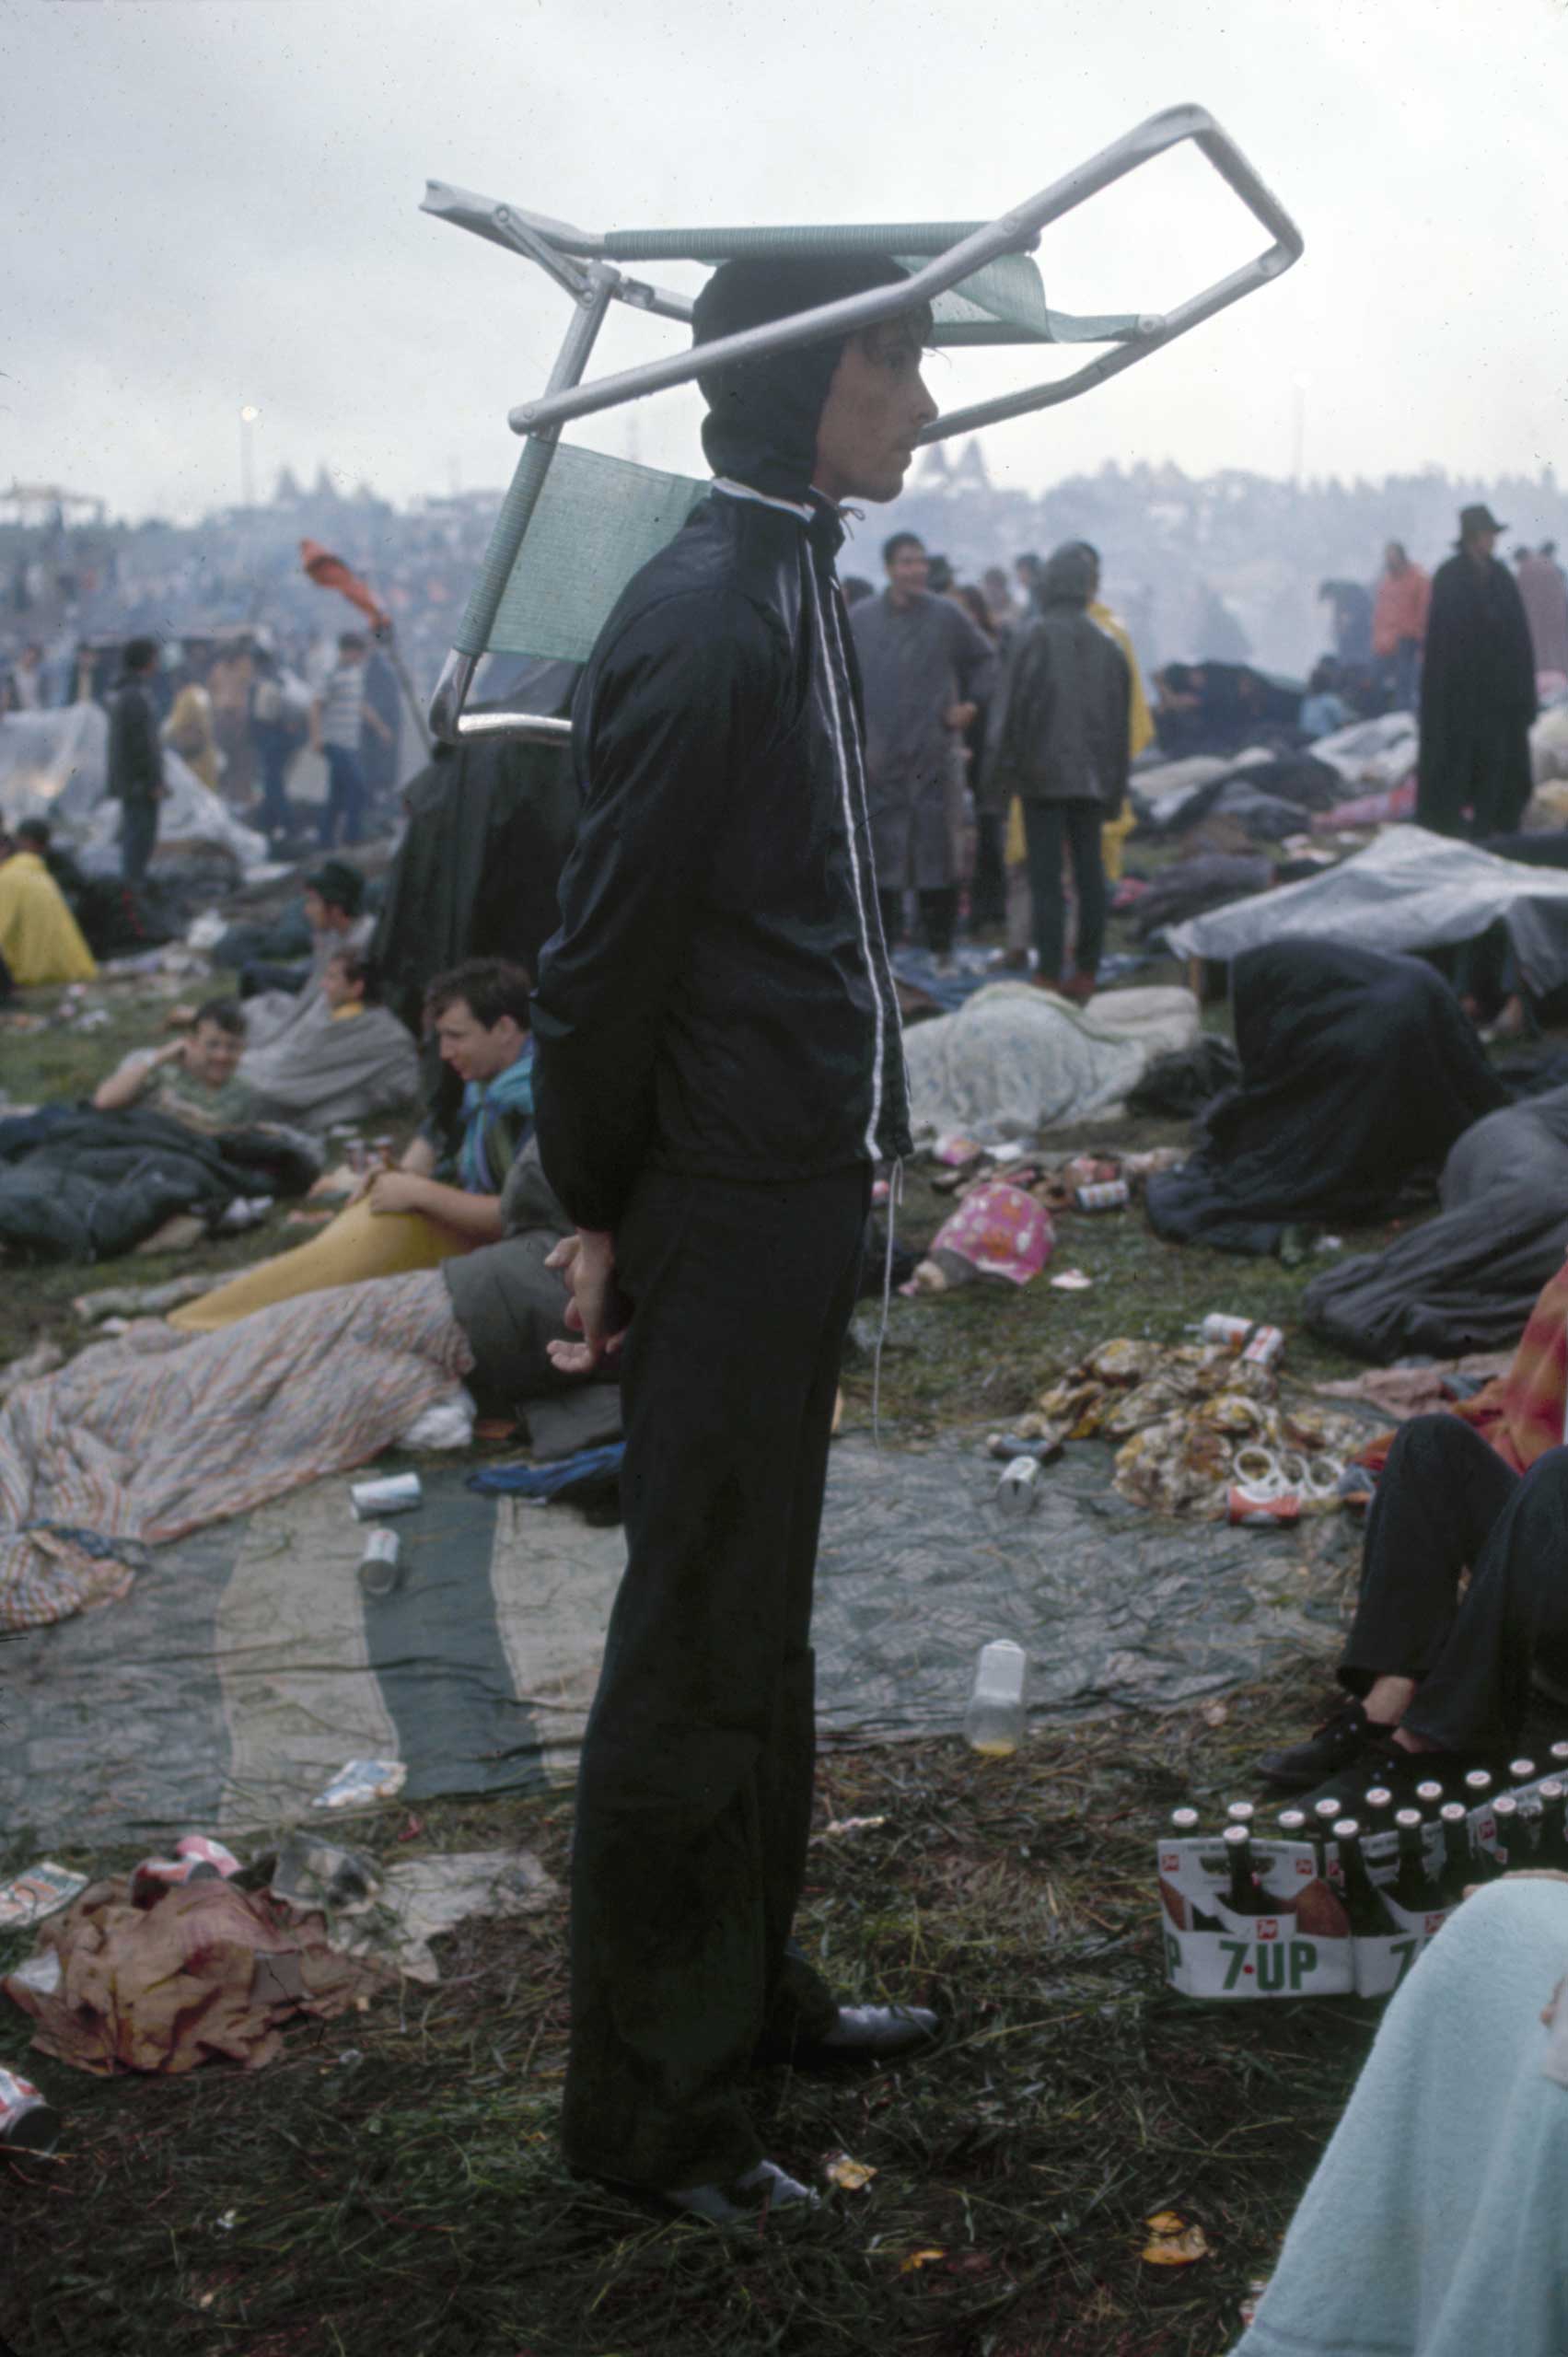 <b>Not published in LIFE.</b> Woodstock Music &amp; Art Fair, August 1969. (Bill Eppridge&mdash;Time &amp; Life Pictures/Getty Images)